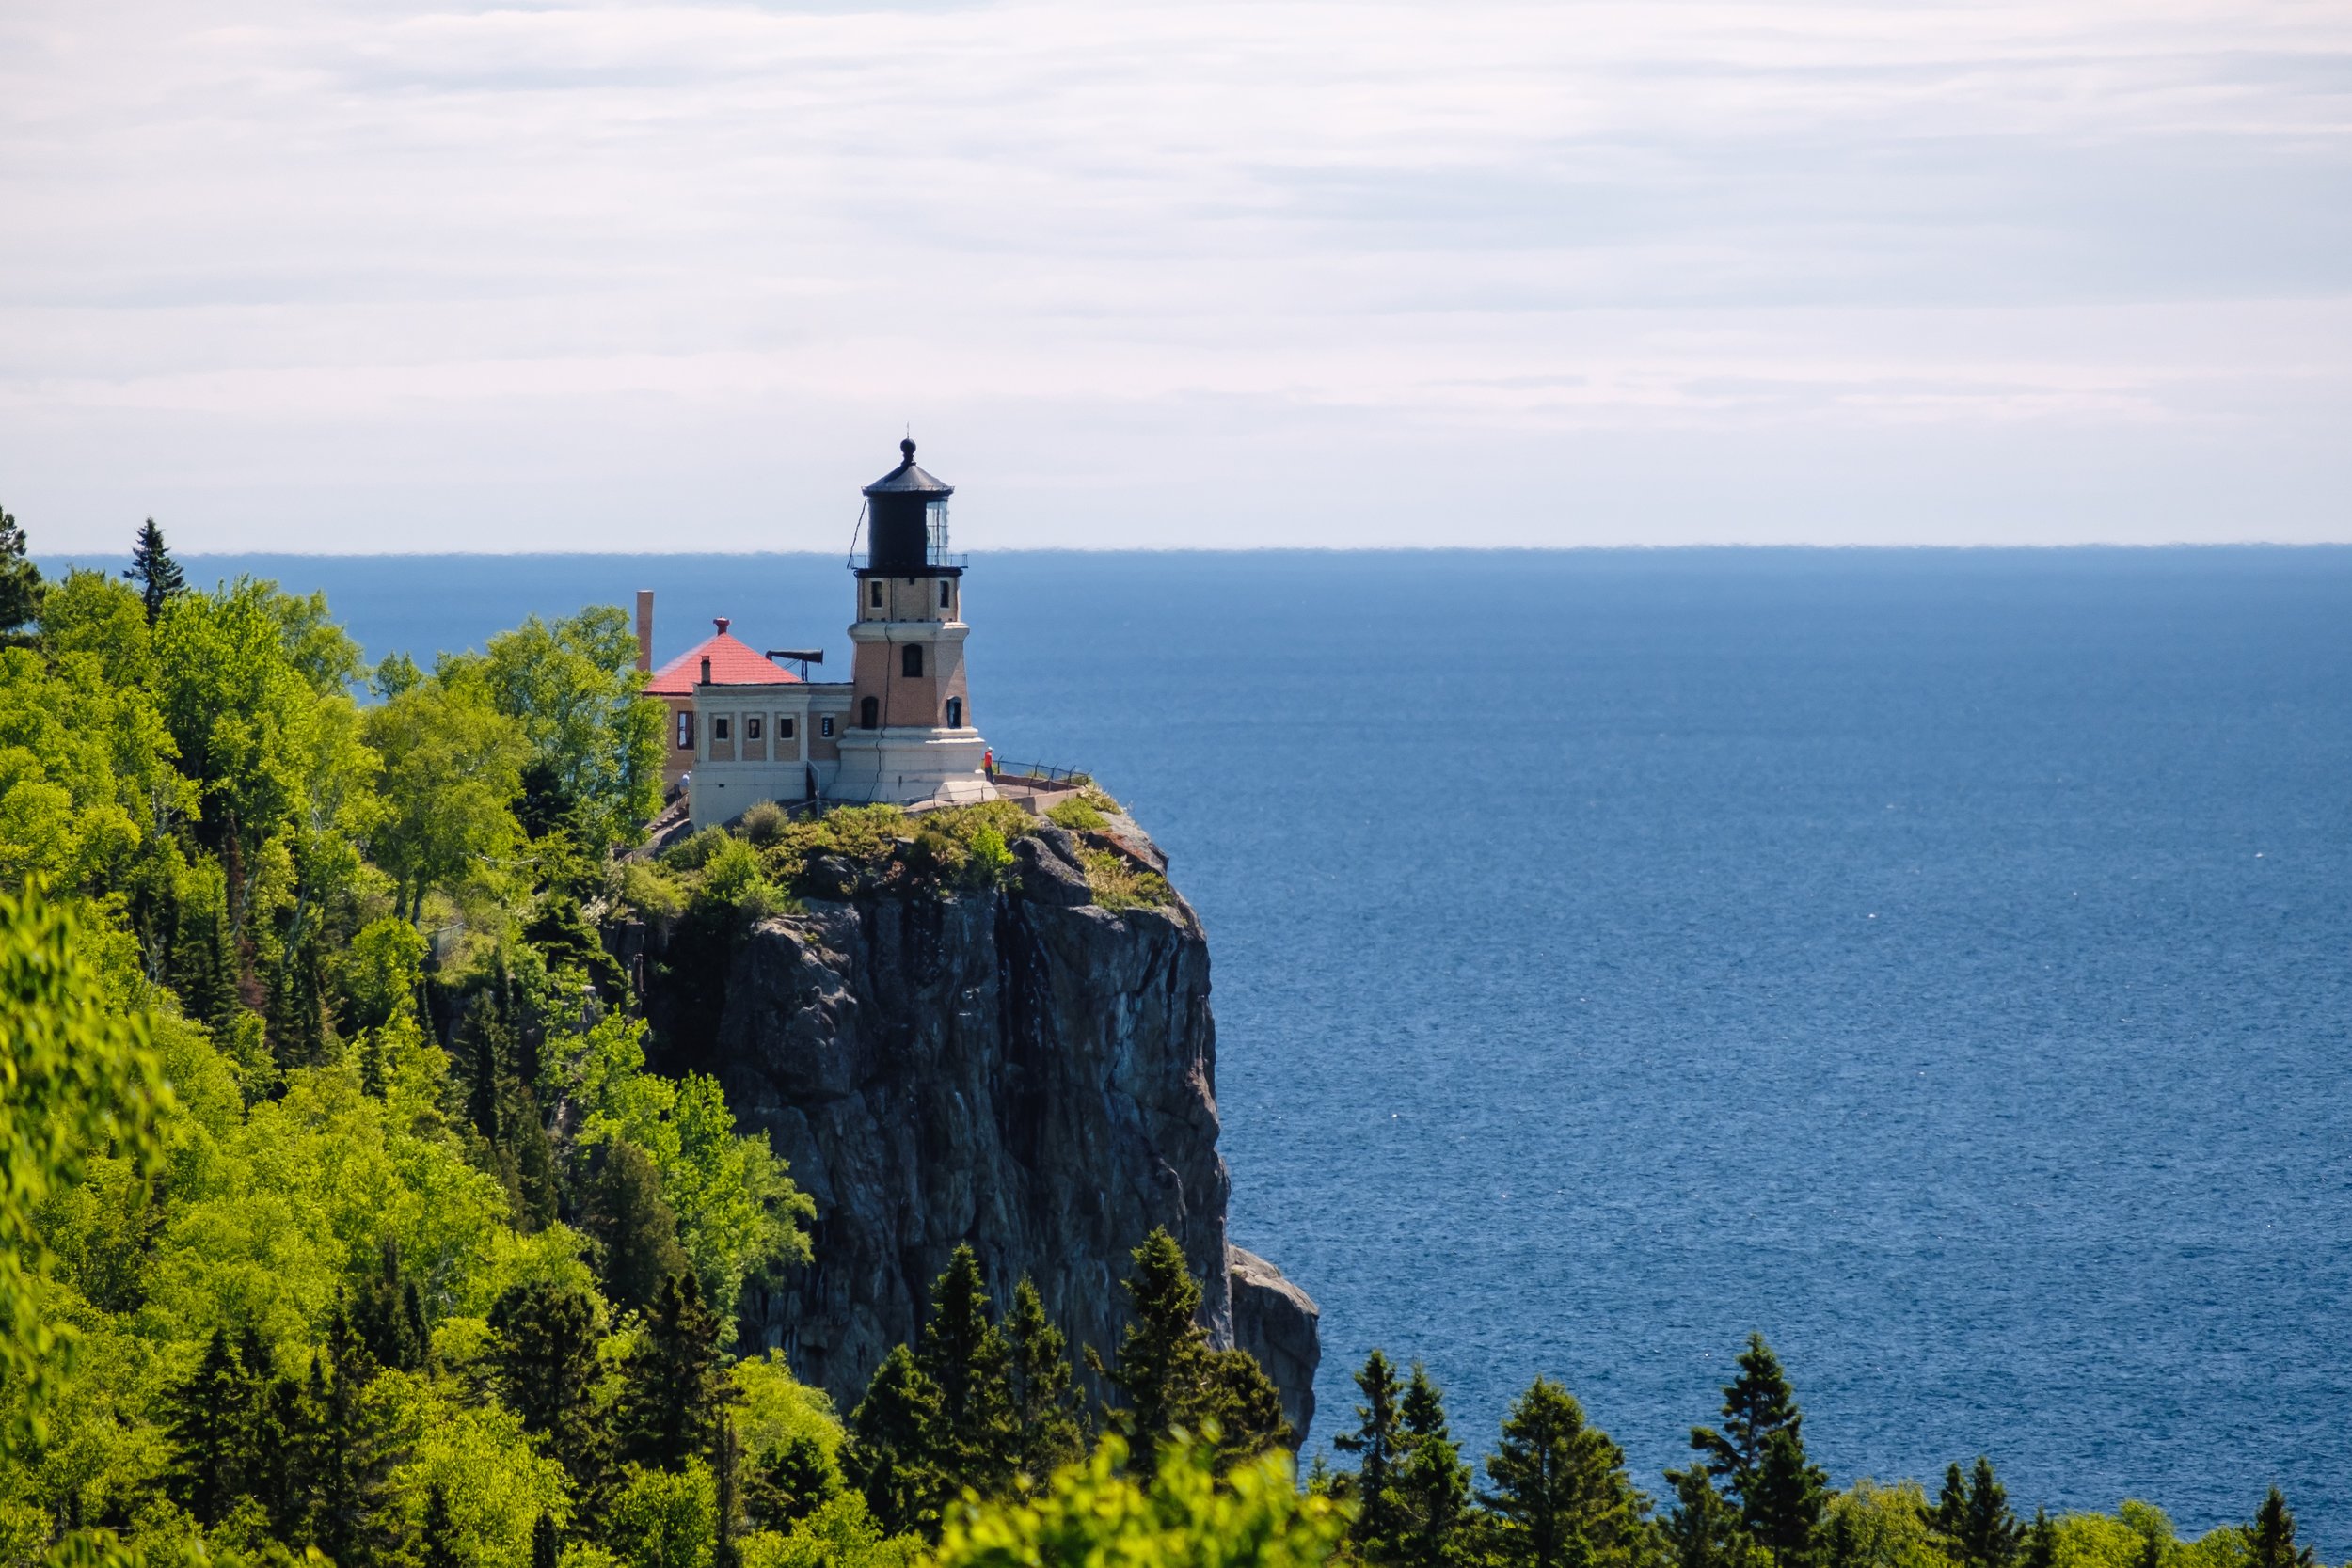  A lighthouse along the Minnesota shore of Lake Superior. This lighthouse was built in the early 1900s after ‘The Storm of the Century’ wrecked a dozen ships against the North Shore. 